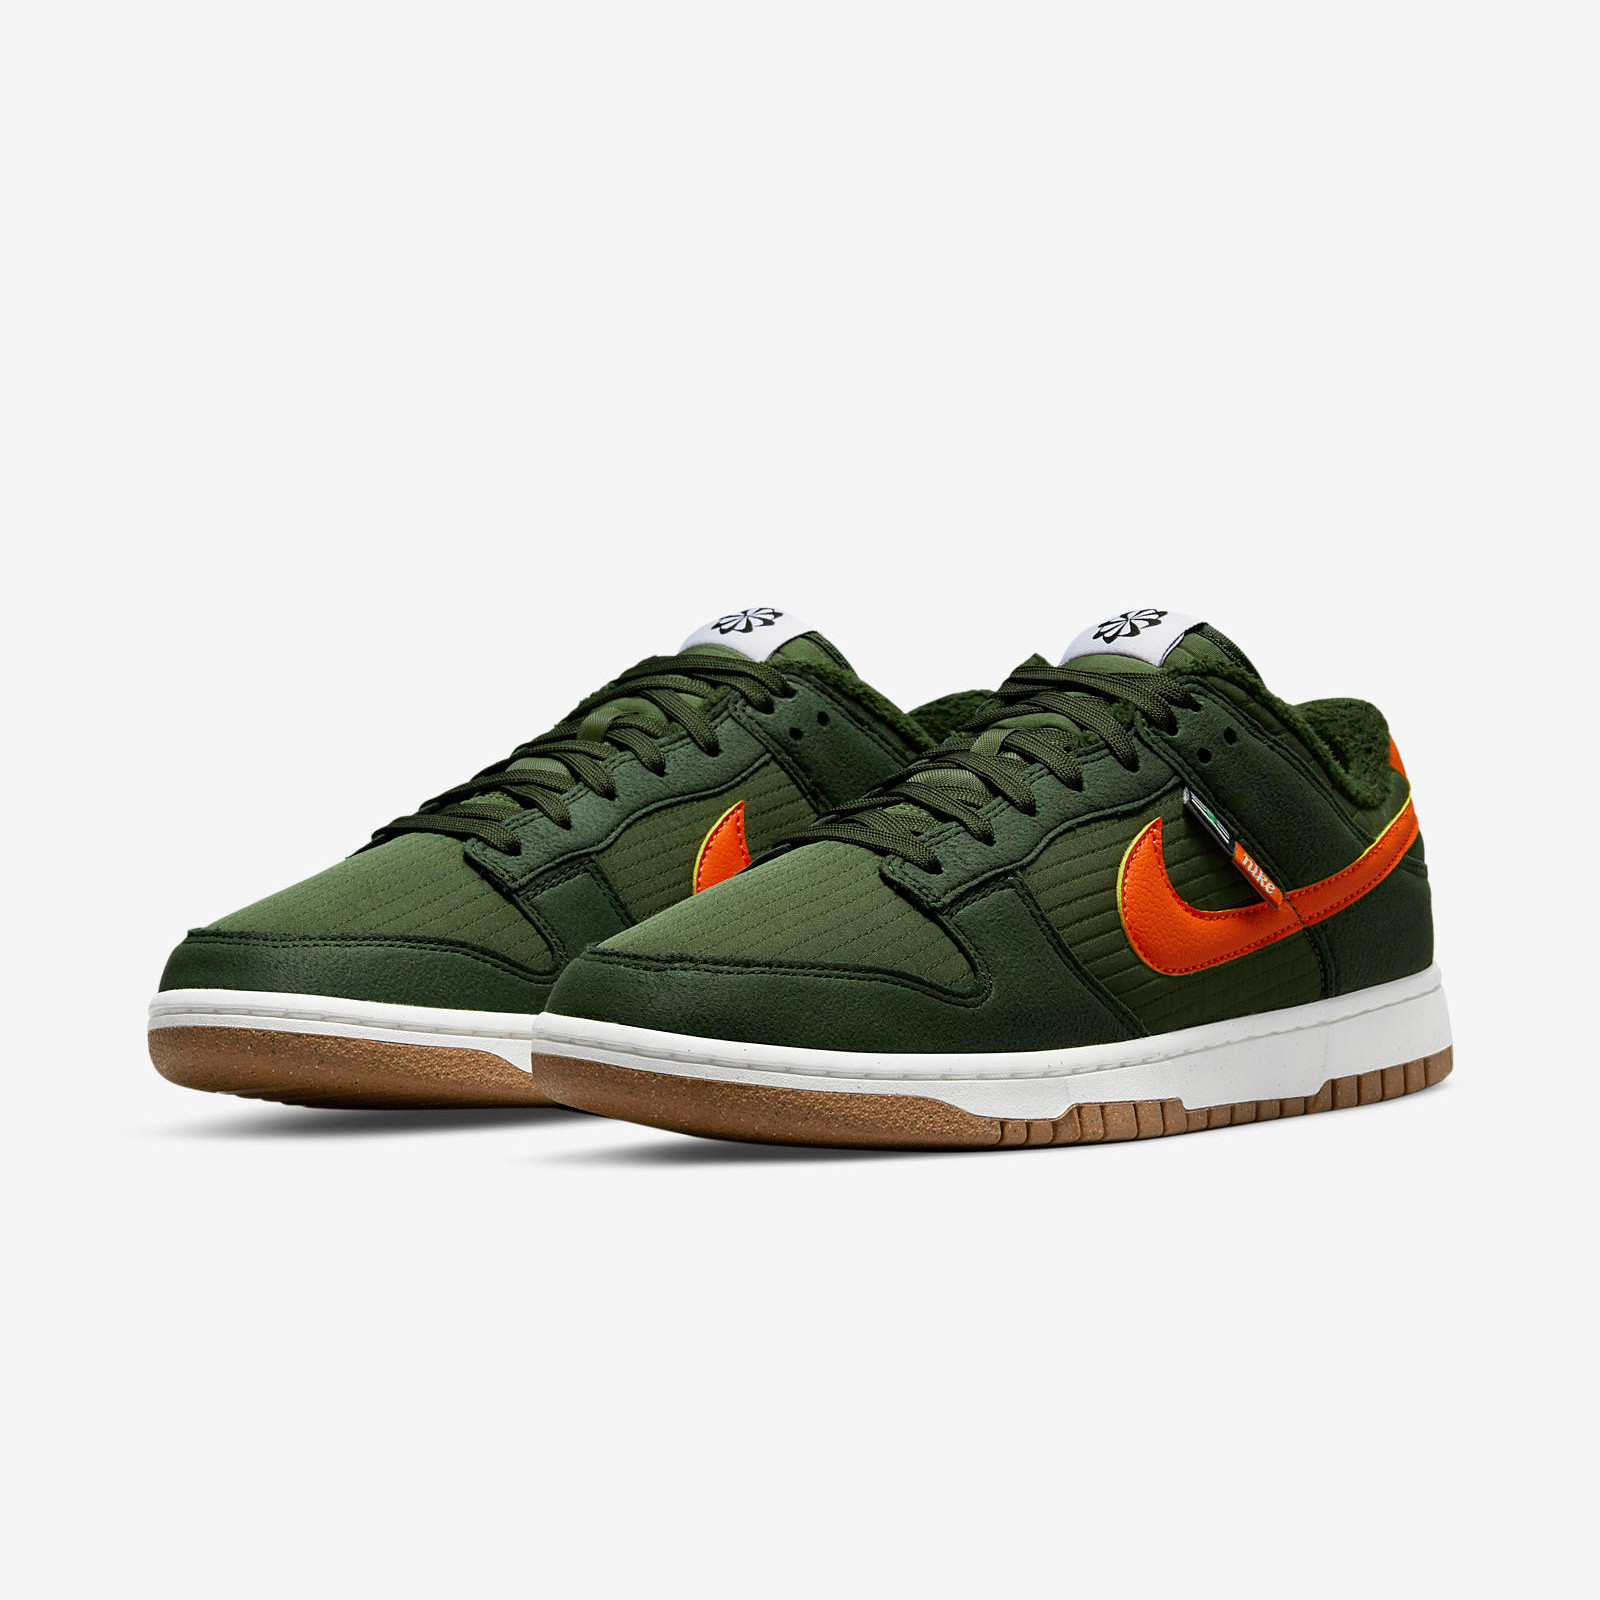 Nike Dunk Low
Next Nature
« Sequoia »